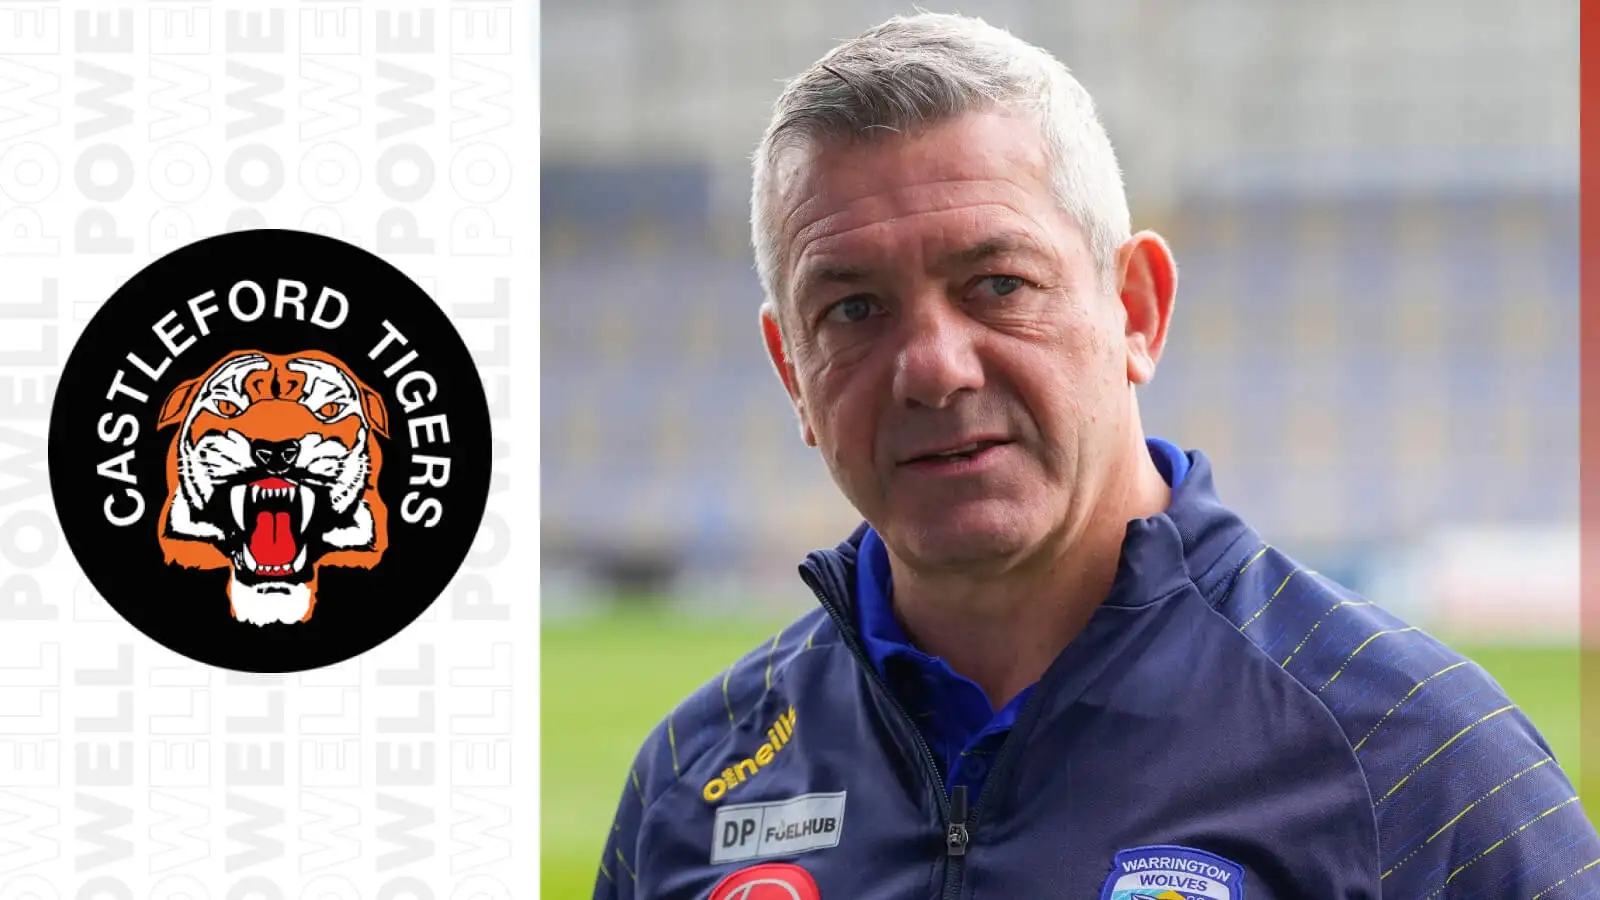 Castleford Tigers supporters have called for the return of Daryl Powell.